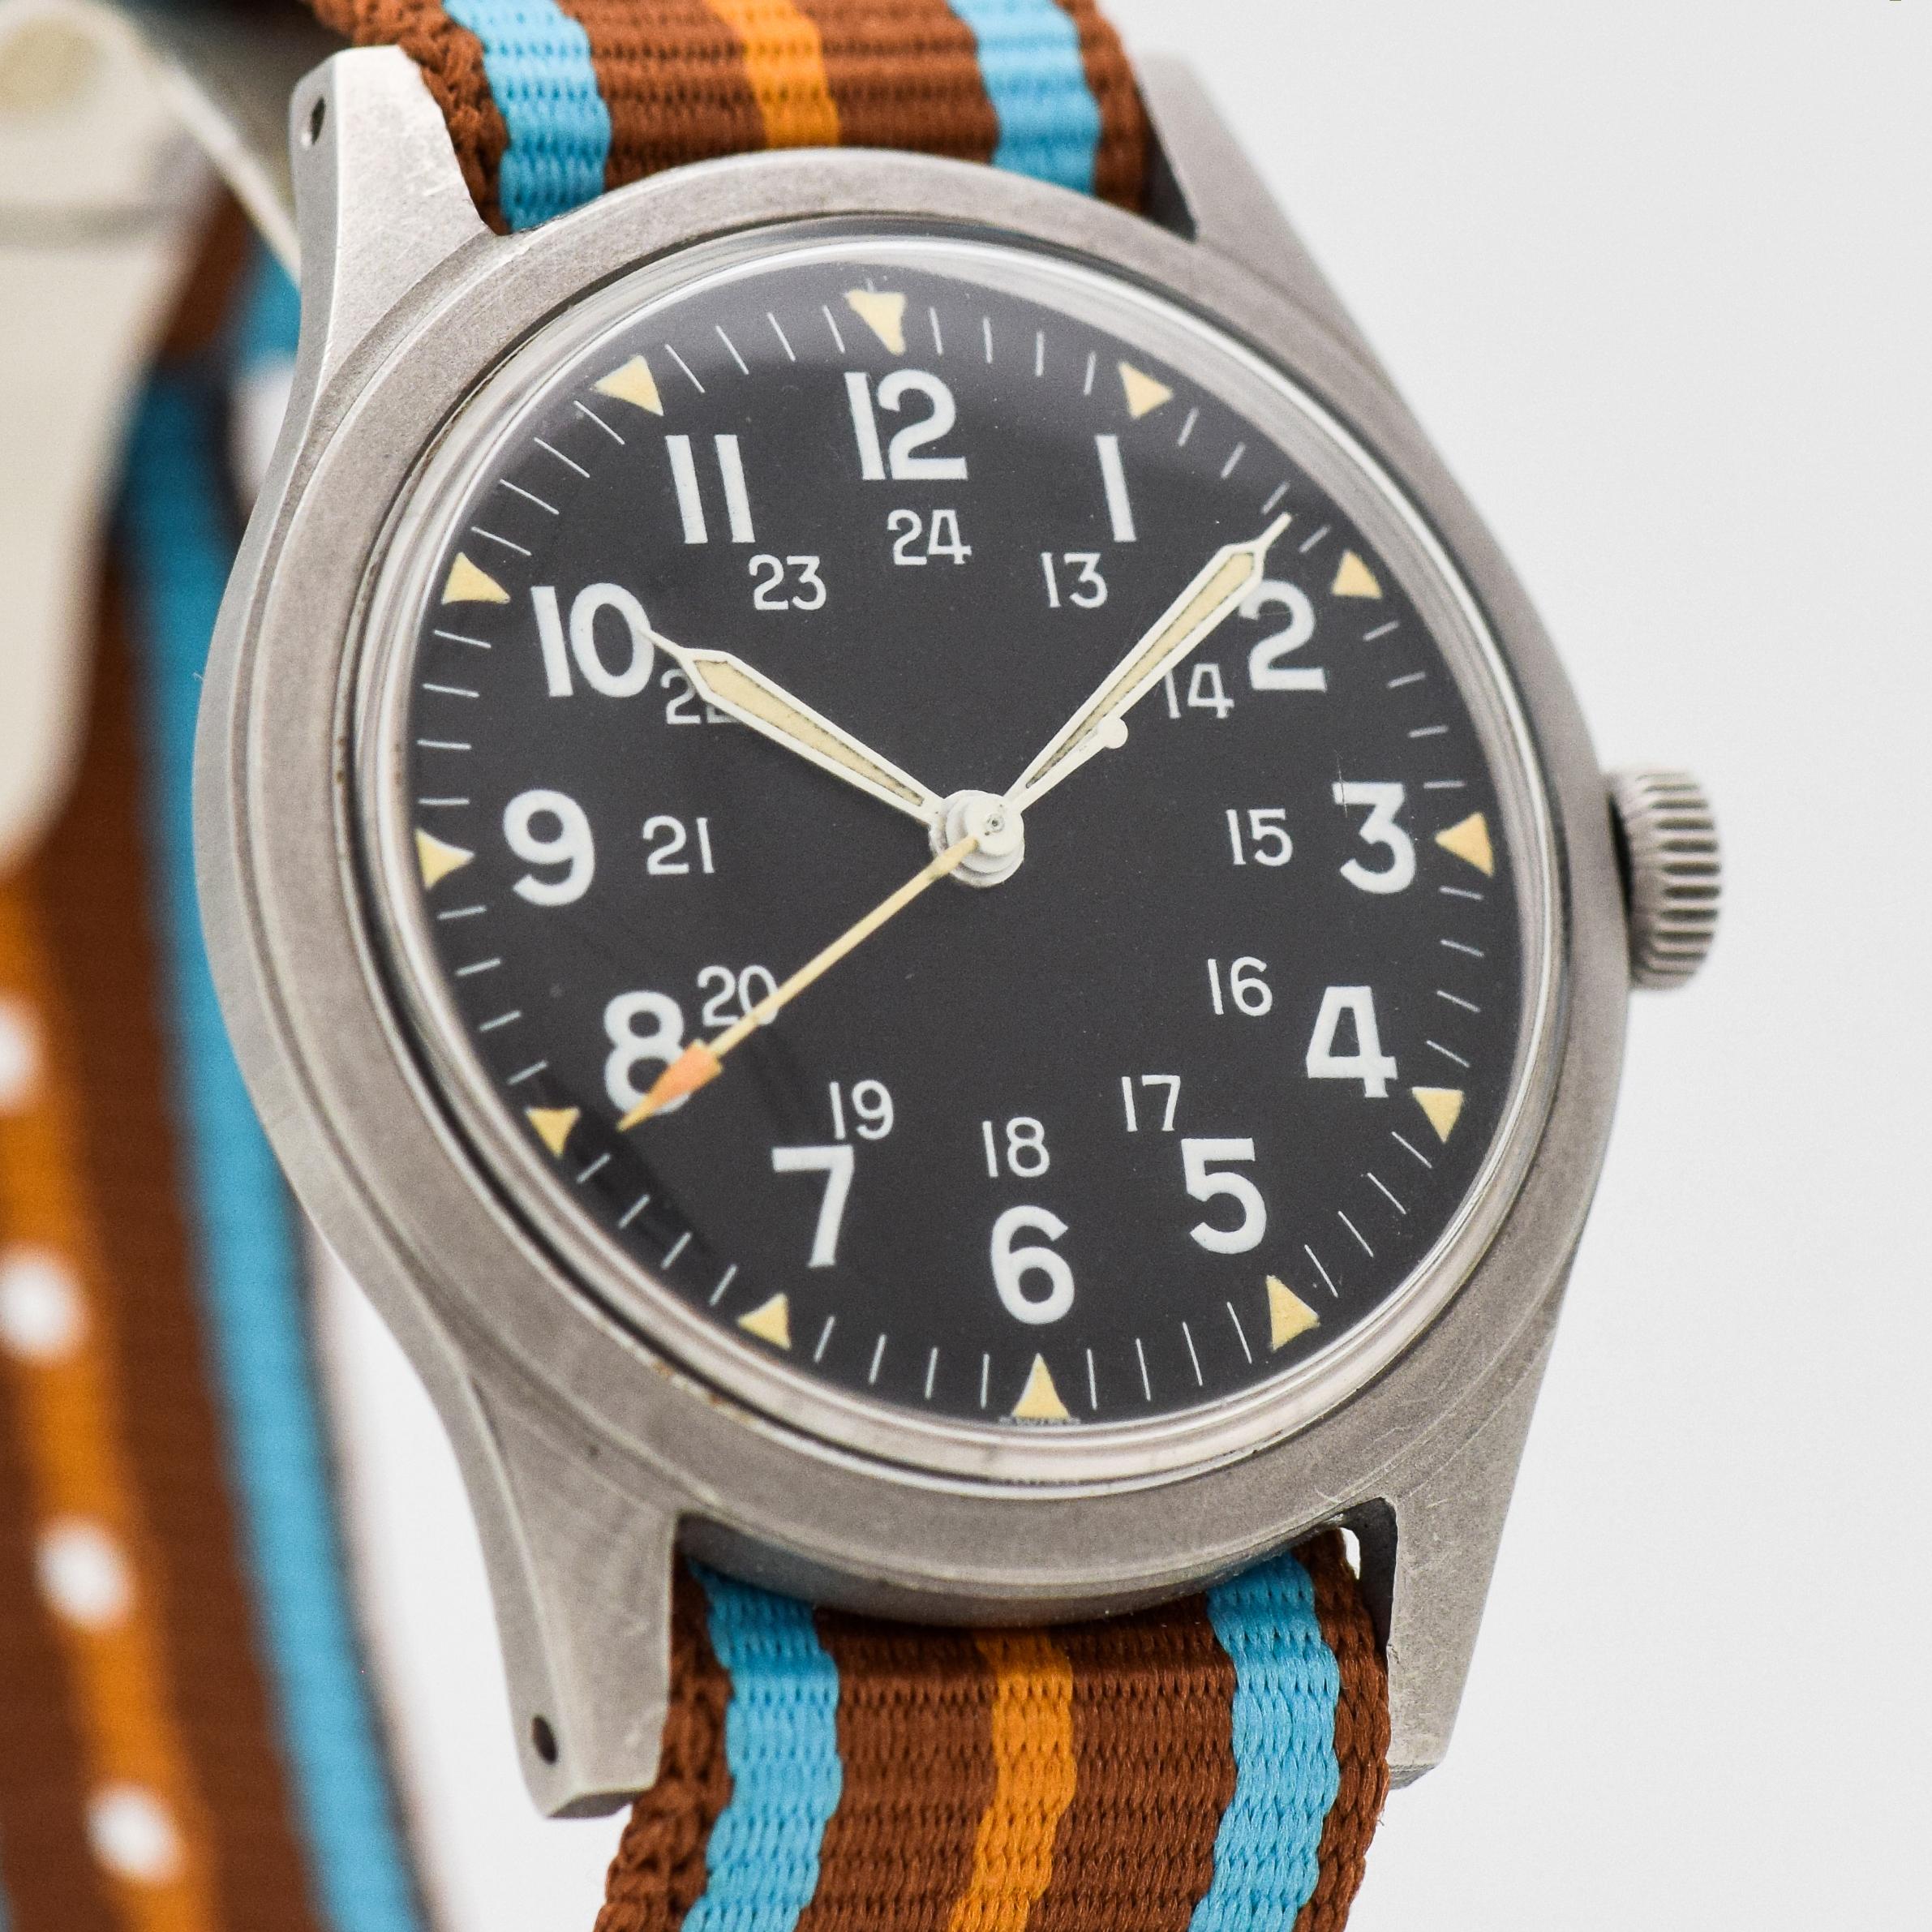 1967 Vintage Benrus Military Stainless Steel watch with Original Black Dial with White Luminous Arabic Numbers. 34mm x 40mm lug to lug (1.34 in. x 1.57 in.) - 17 jewel, manual caliber movement. Equipped with a Nylon-style Brown, Blue &